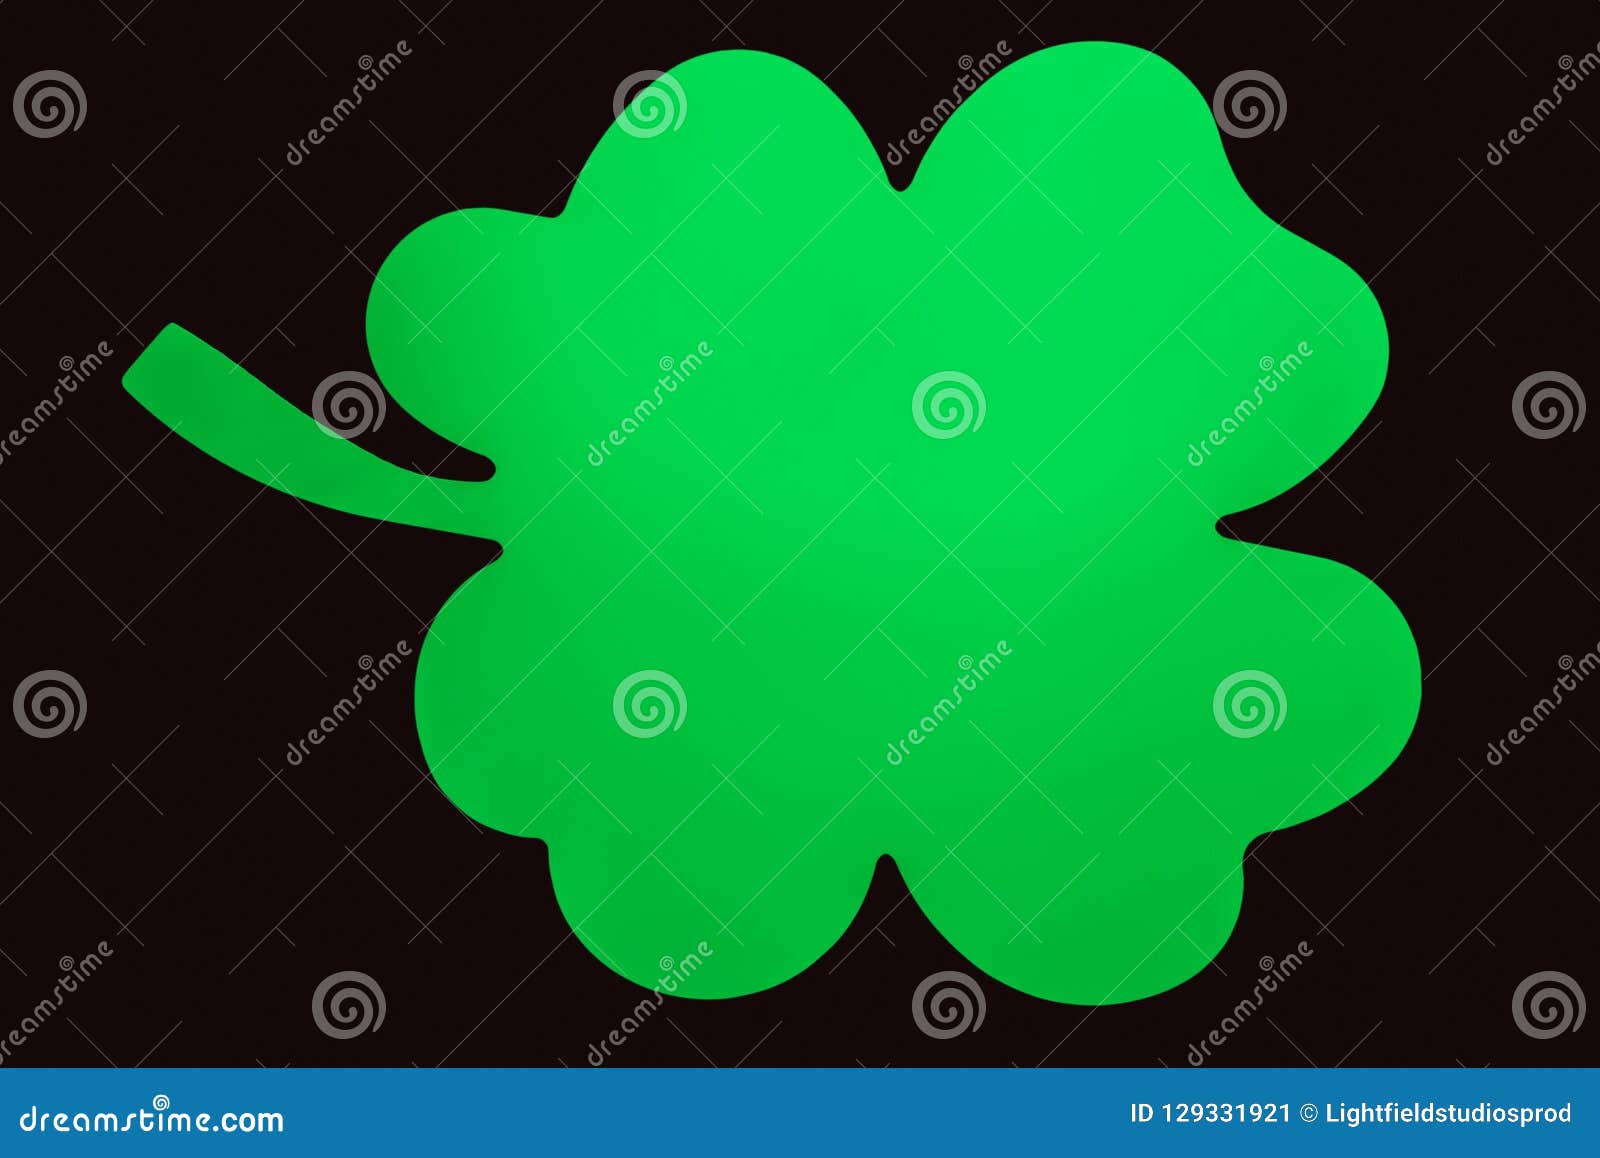 close-up view of green clover 